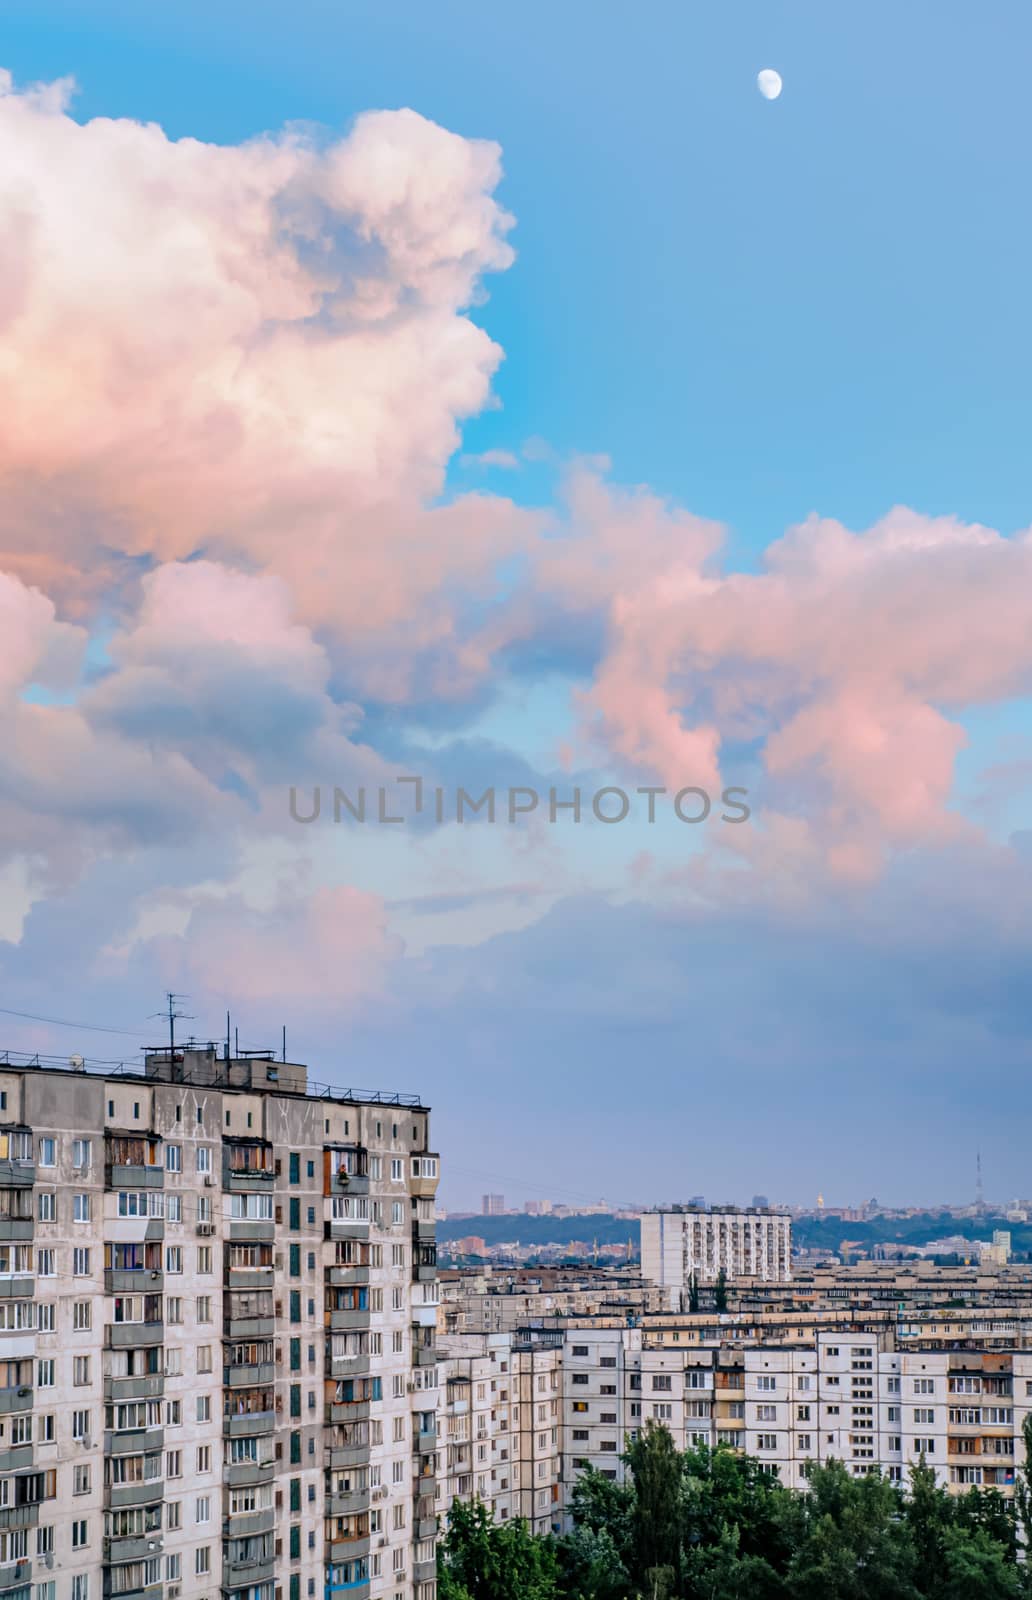 High buildings in the Obolon district of Kiev, Ukraine, near the Minska metro station. Big pink clouds in the sky, and the Moon